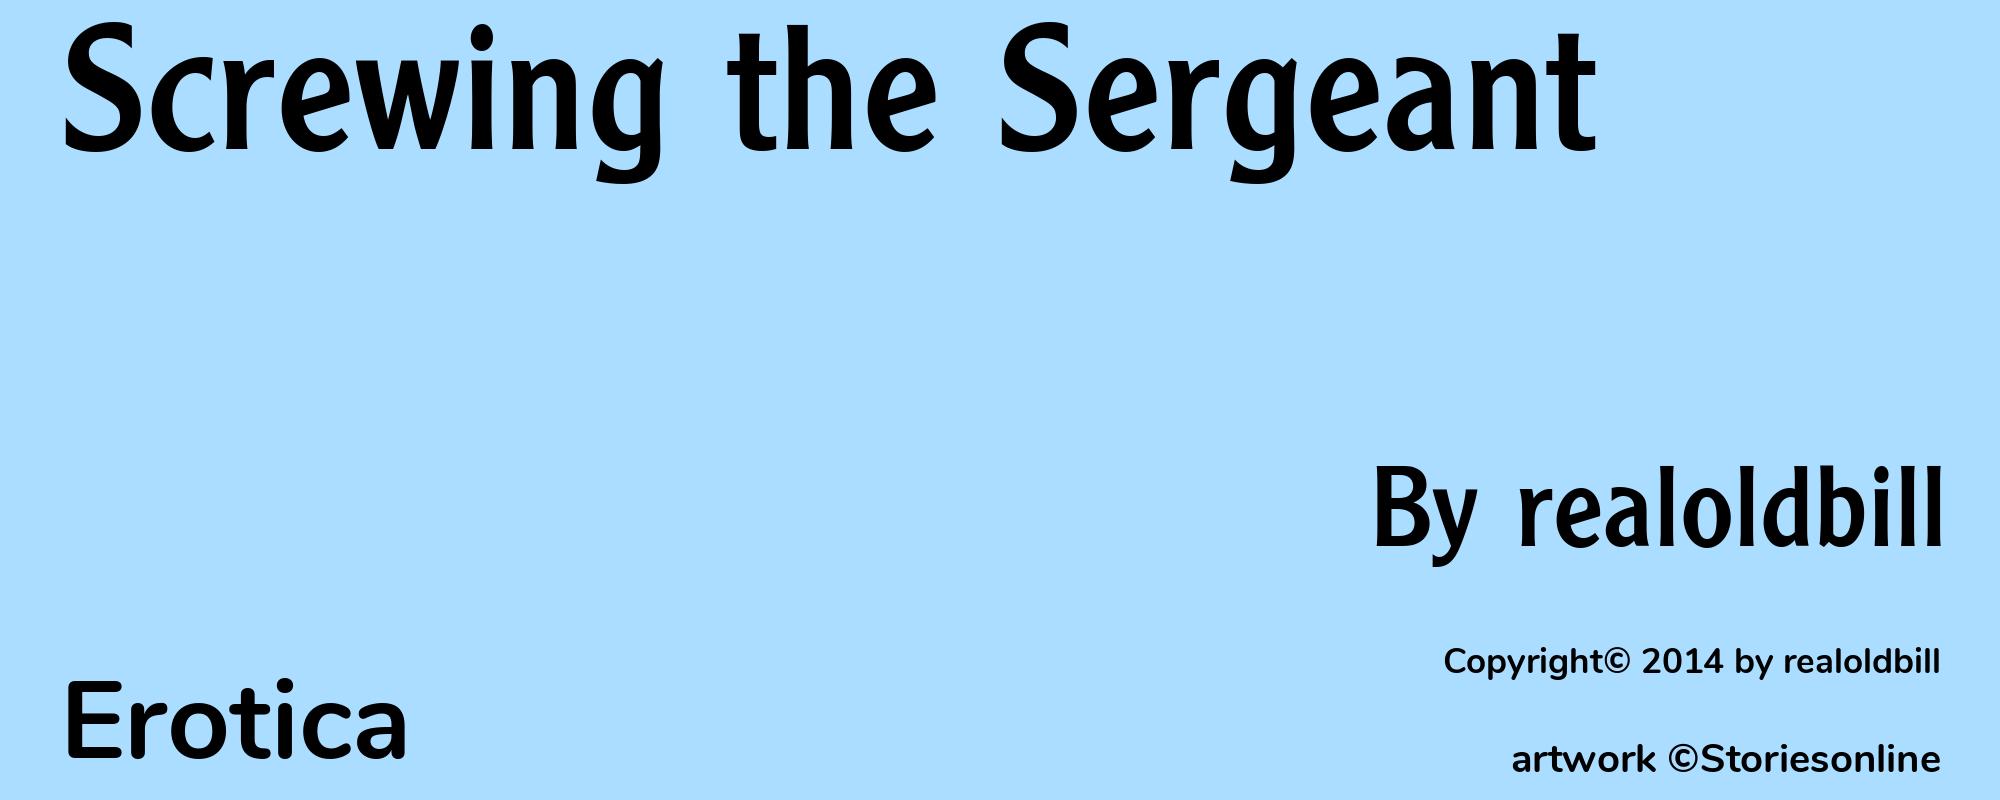 Screwing the Sergeant - Cover